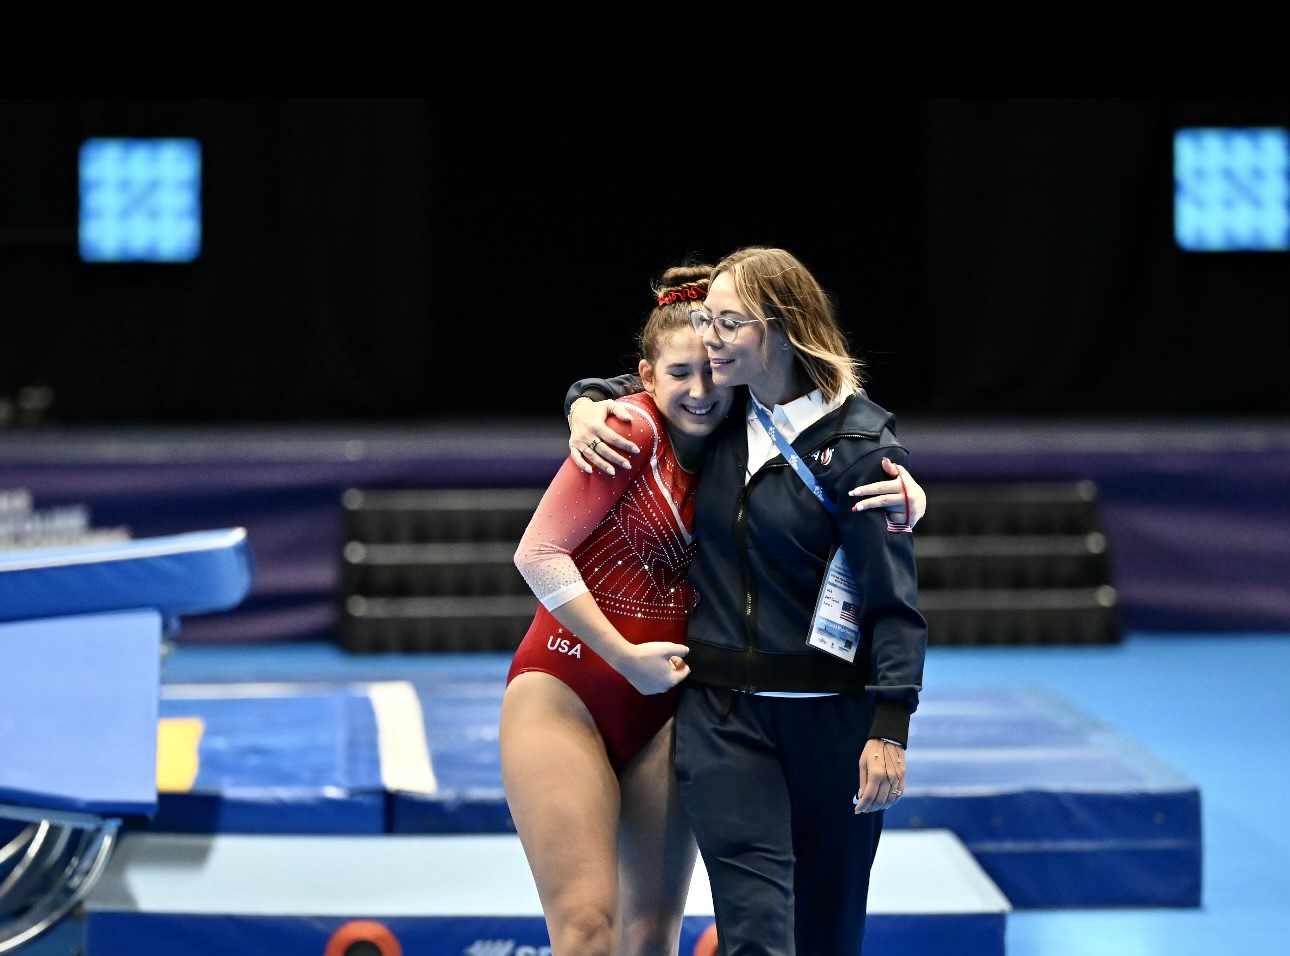 Kent gets support from USA Gymnastics Double Mini National Team head coach Chelsea Rainer after placing sixth in the 37th FIG Trampoline Gymnastics World Championships in Birmingham, GBR